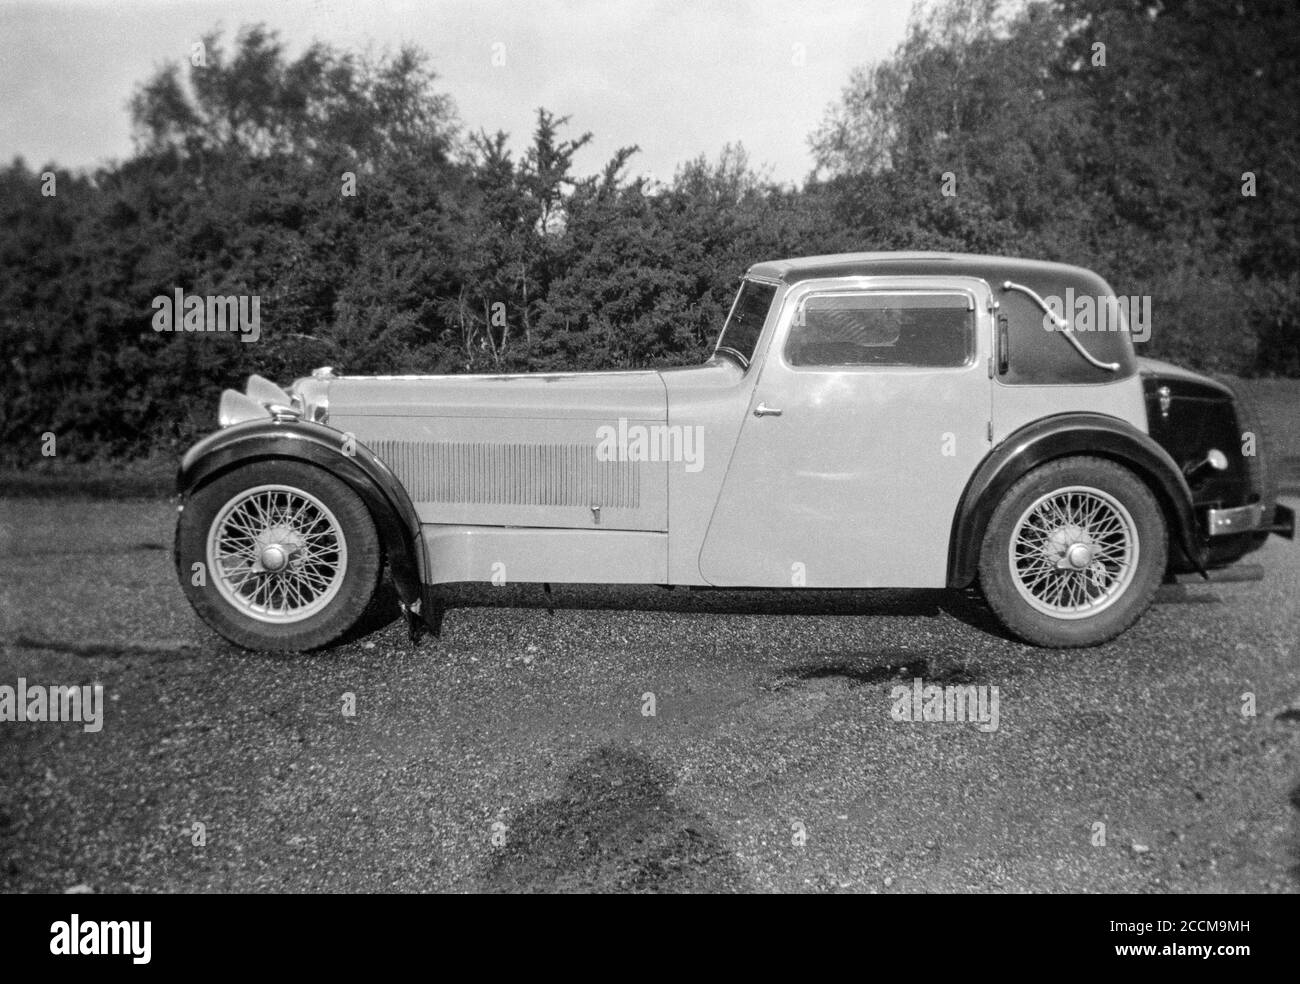 Vintage 1930s black and white photograph of a British Jaguar SS I Coupe Sports car. Registration number GY 6926. Stock Photo